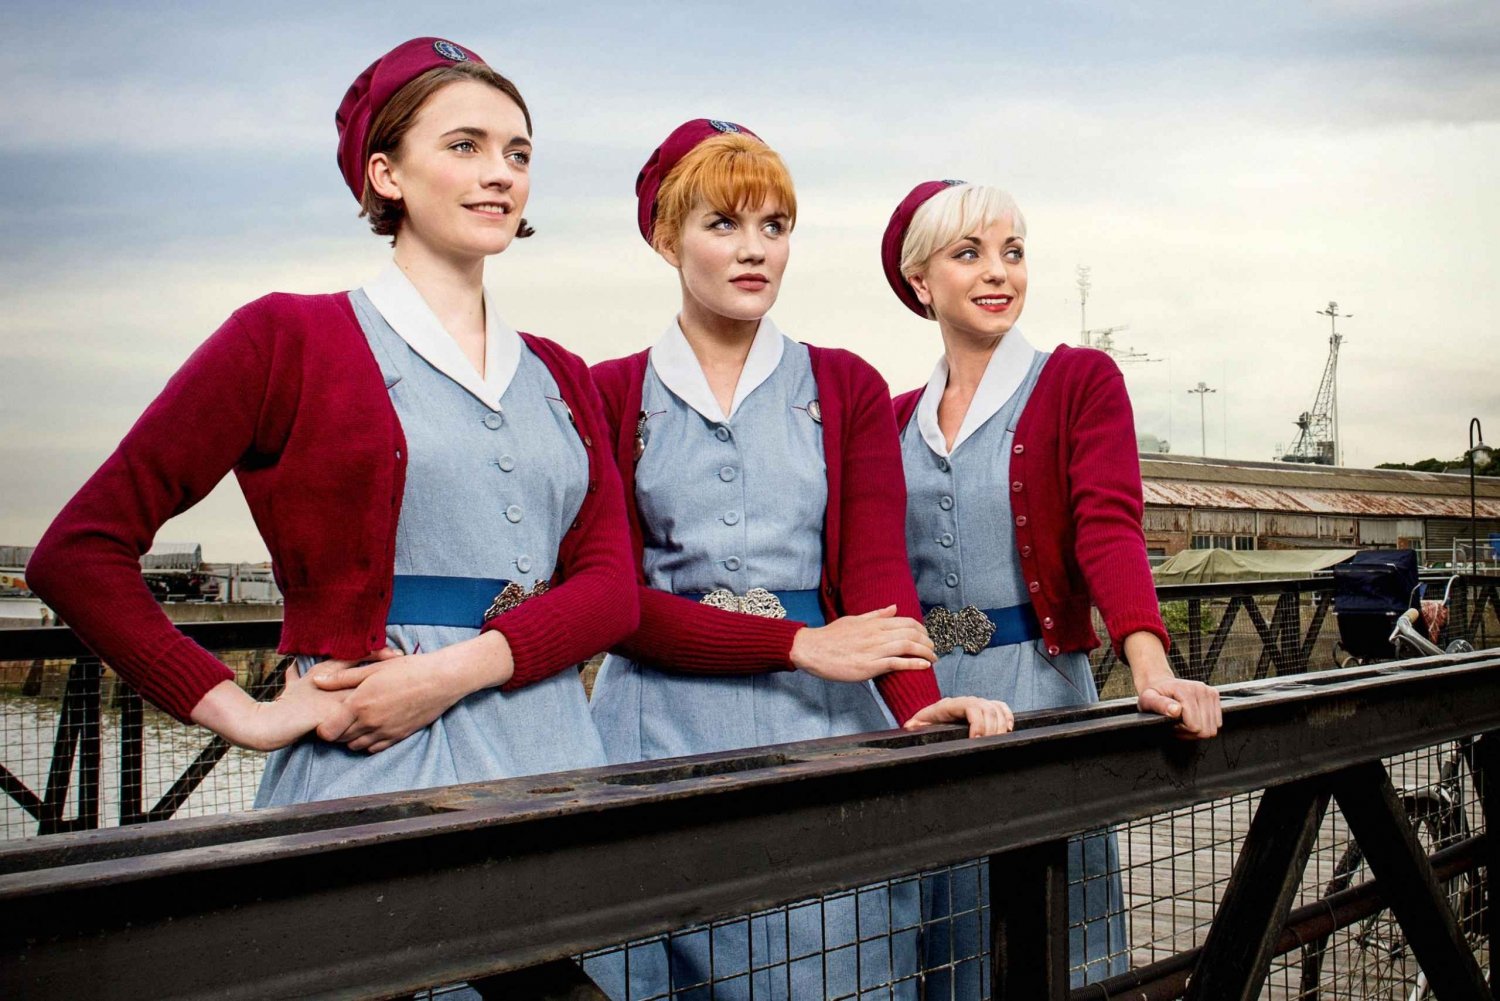 Chatham Historic Dockyard: Call the Midwife Tour